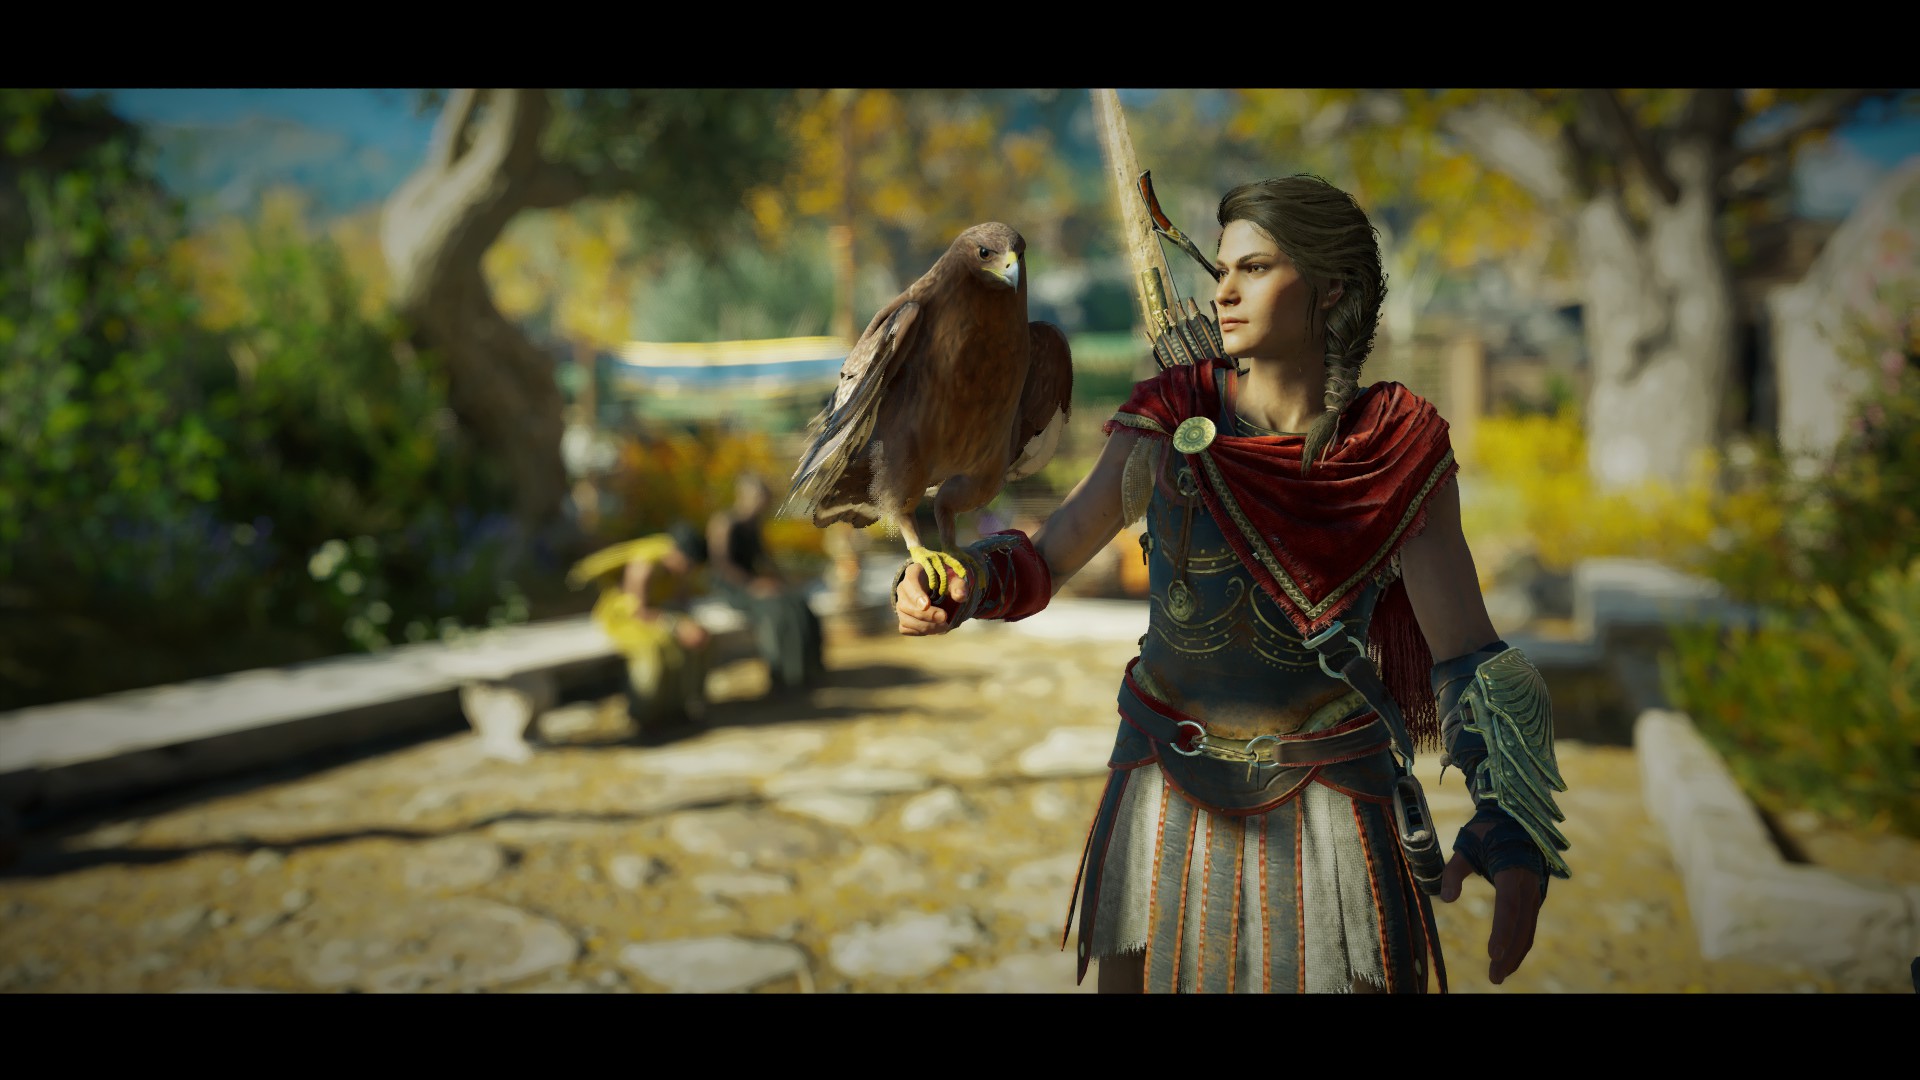 General 1920x1080 Kassandra eagle ancient greece girl in armor armored woman Ikaros Assassin's Creed: Odyssey Ubisoft video games video game characters